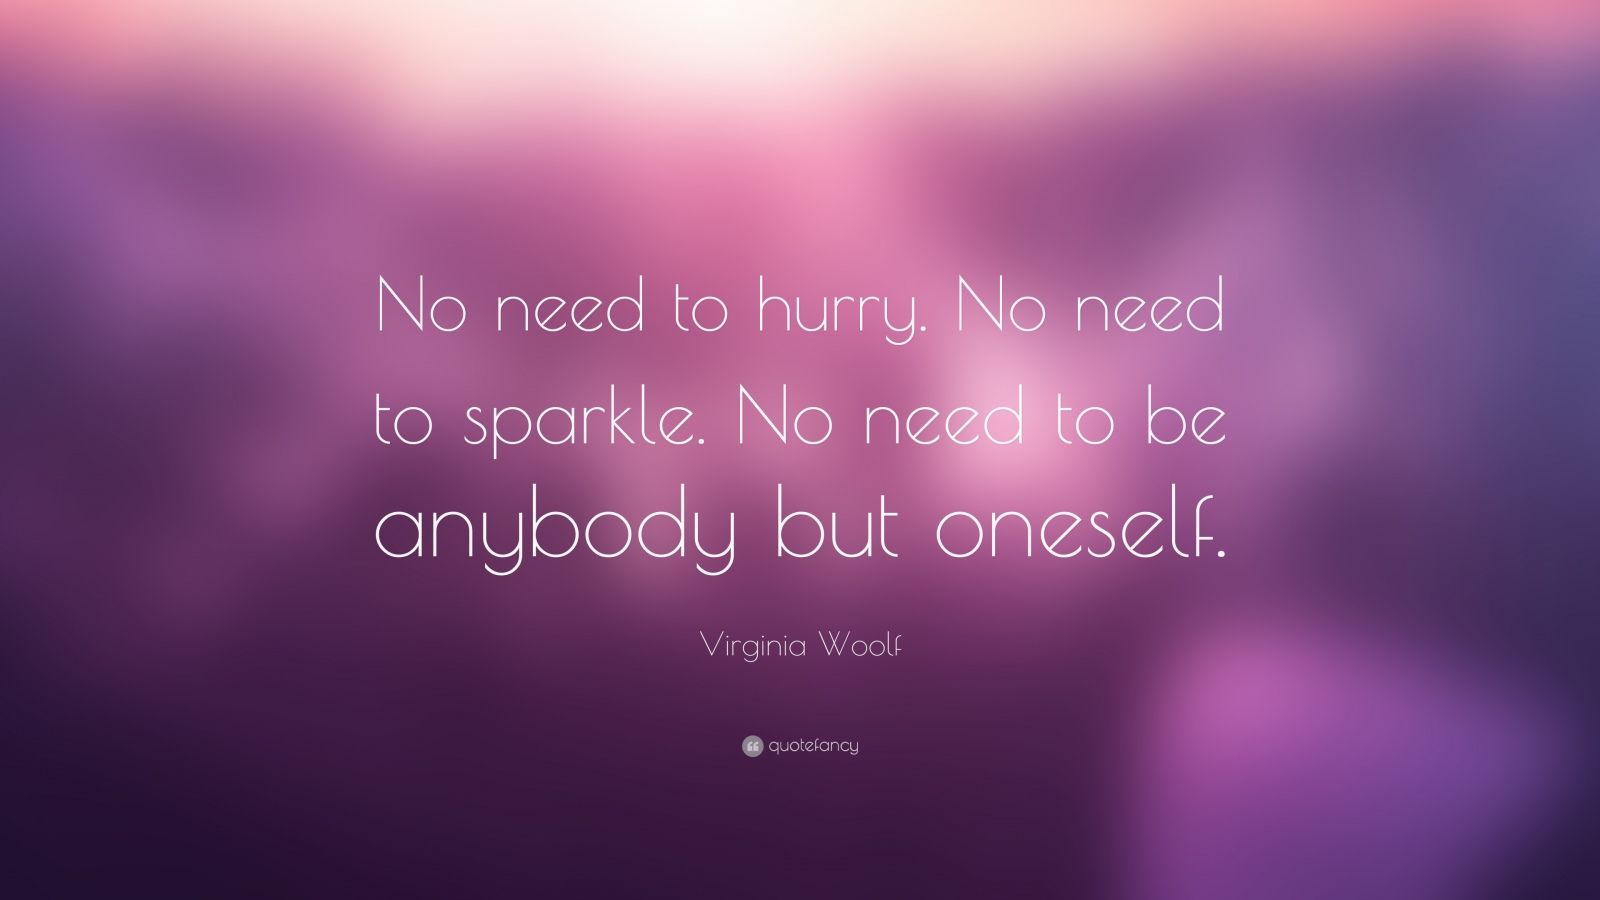 no need to hurry no need to sparkle meaning